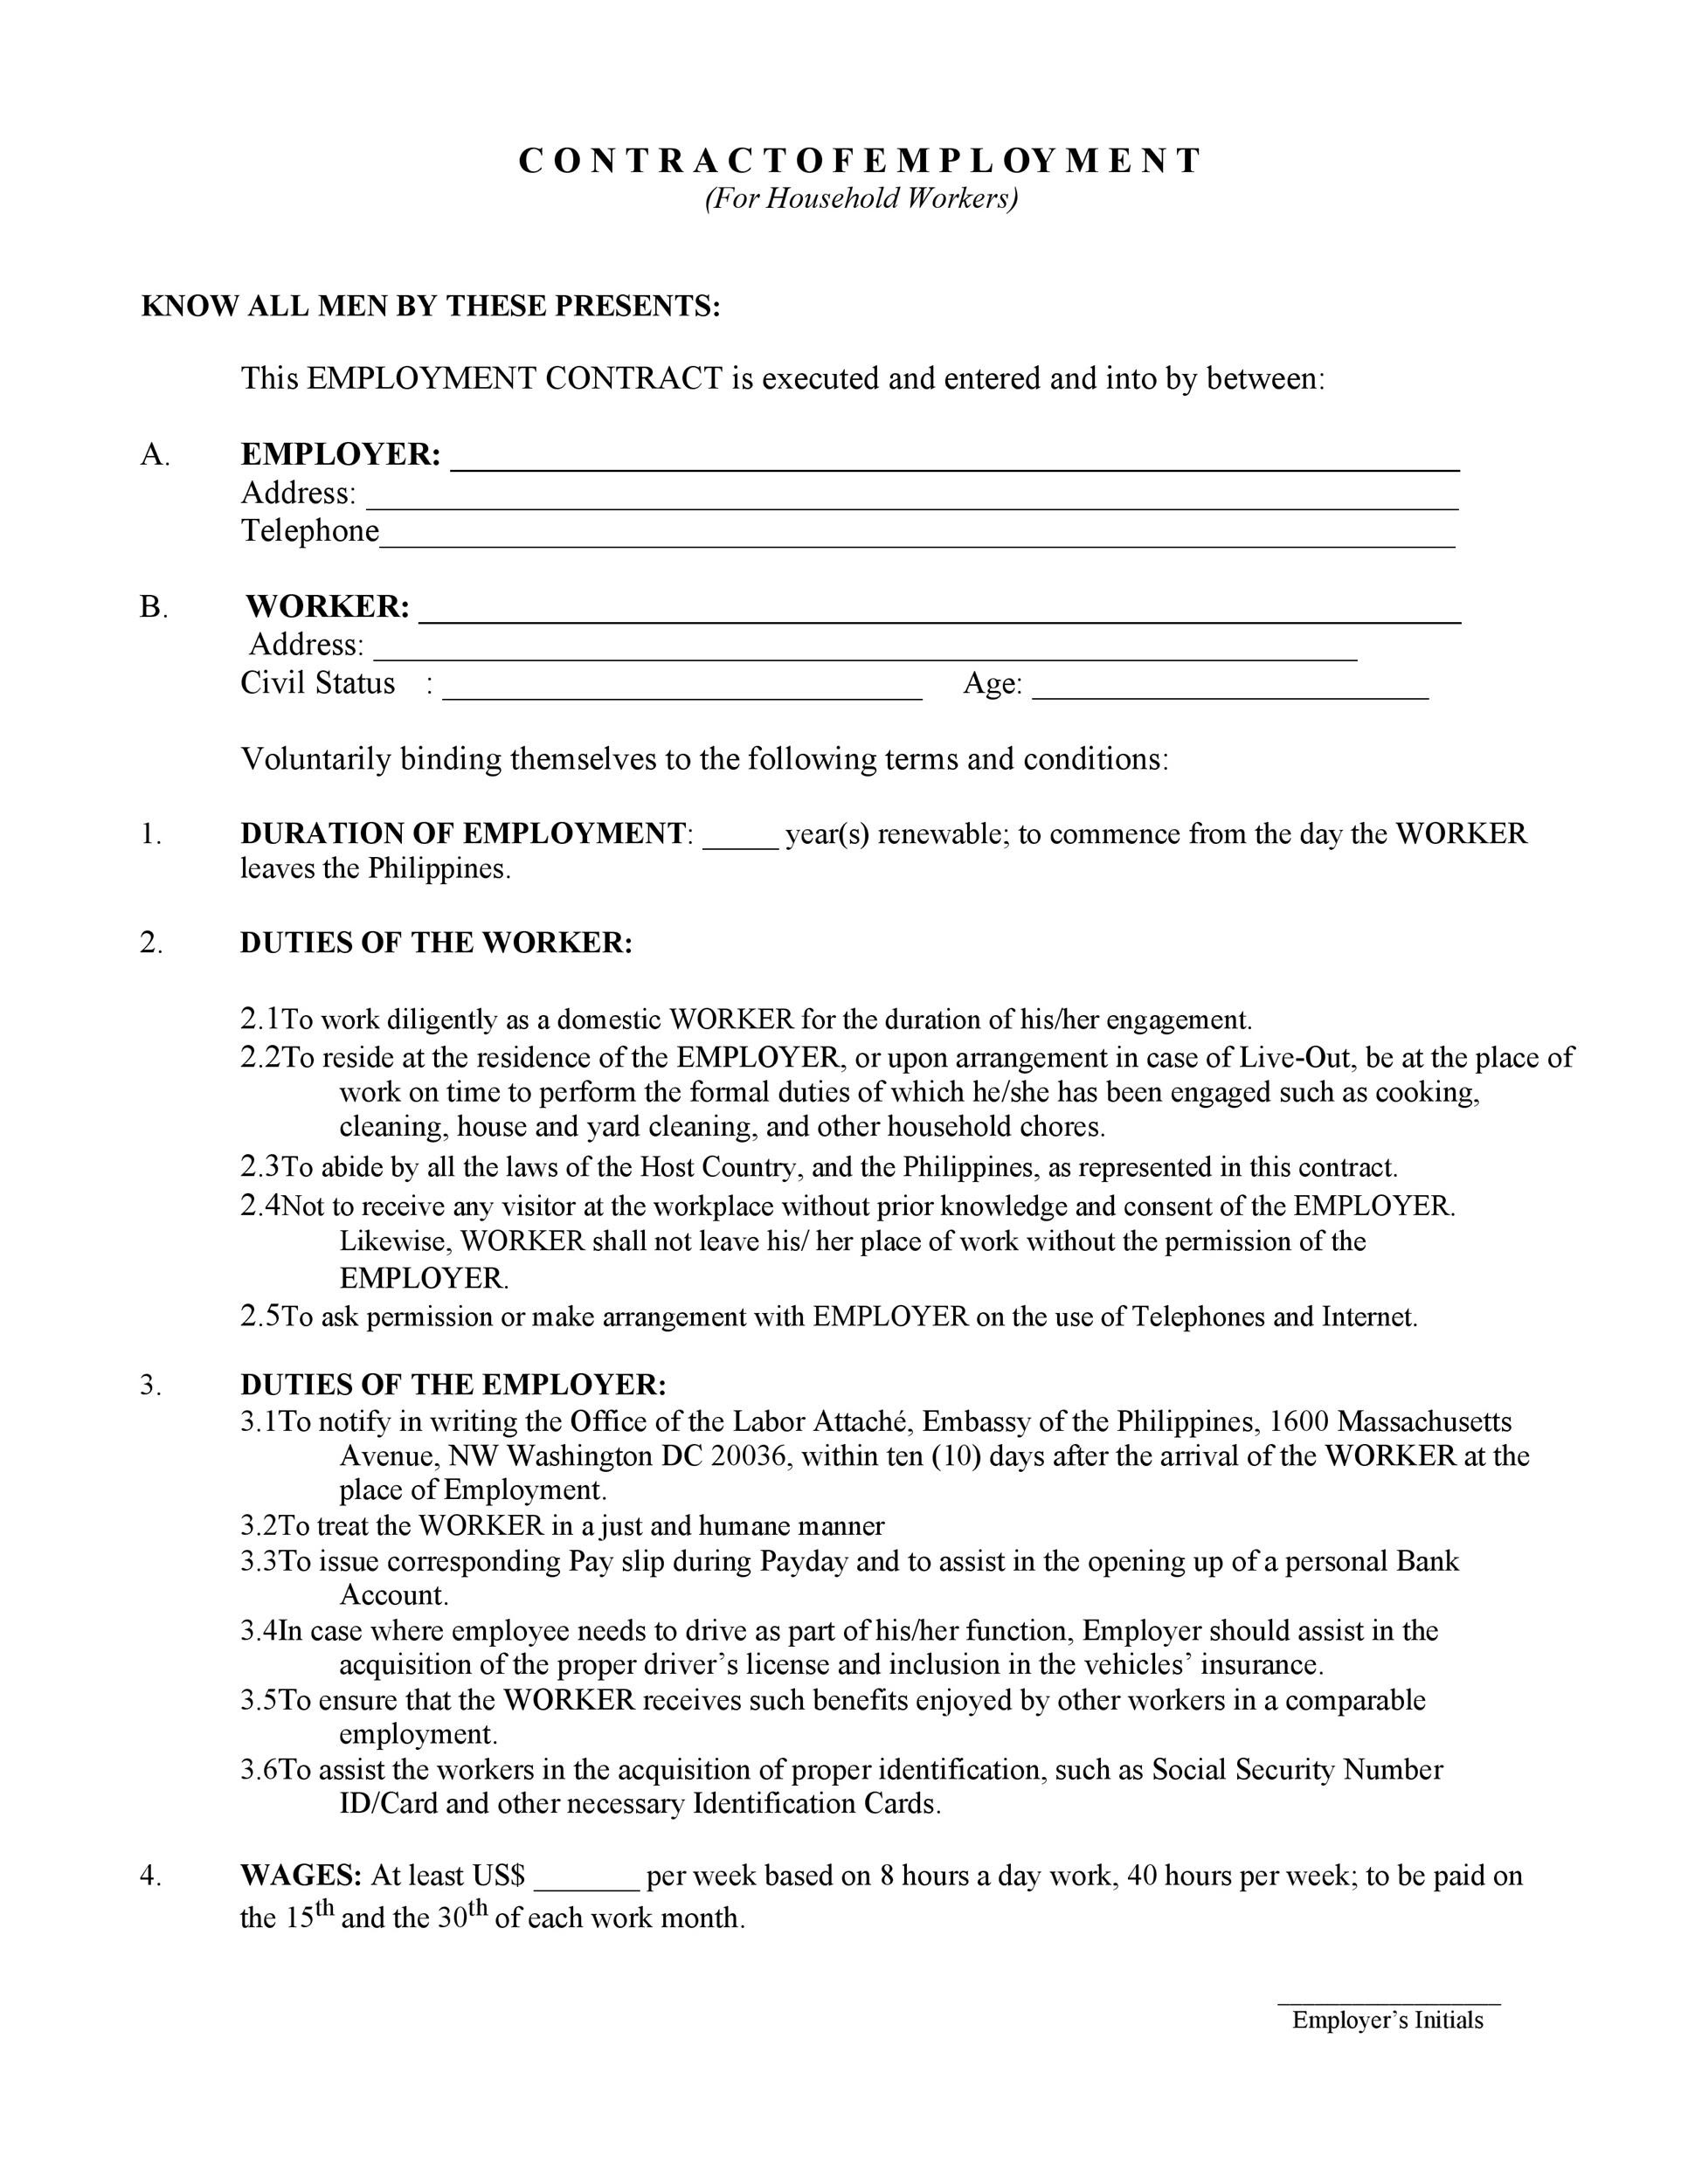 employment-contract-template-philippines-master-template